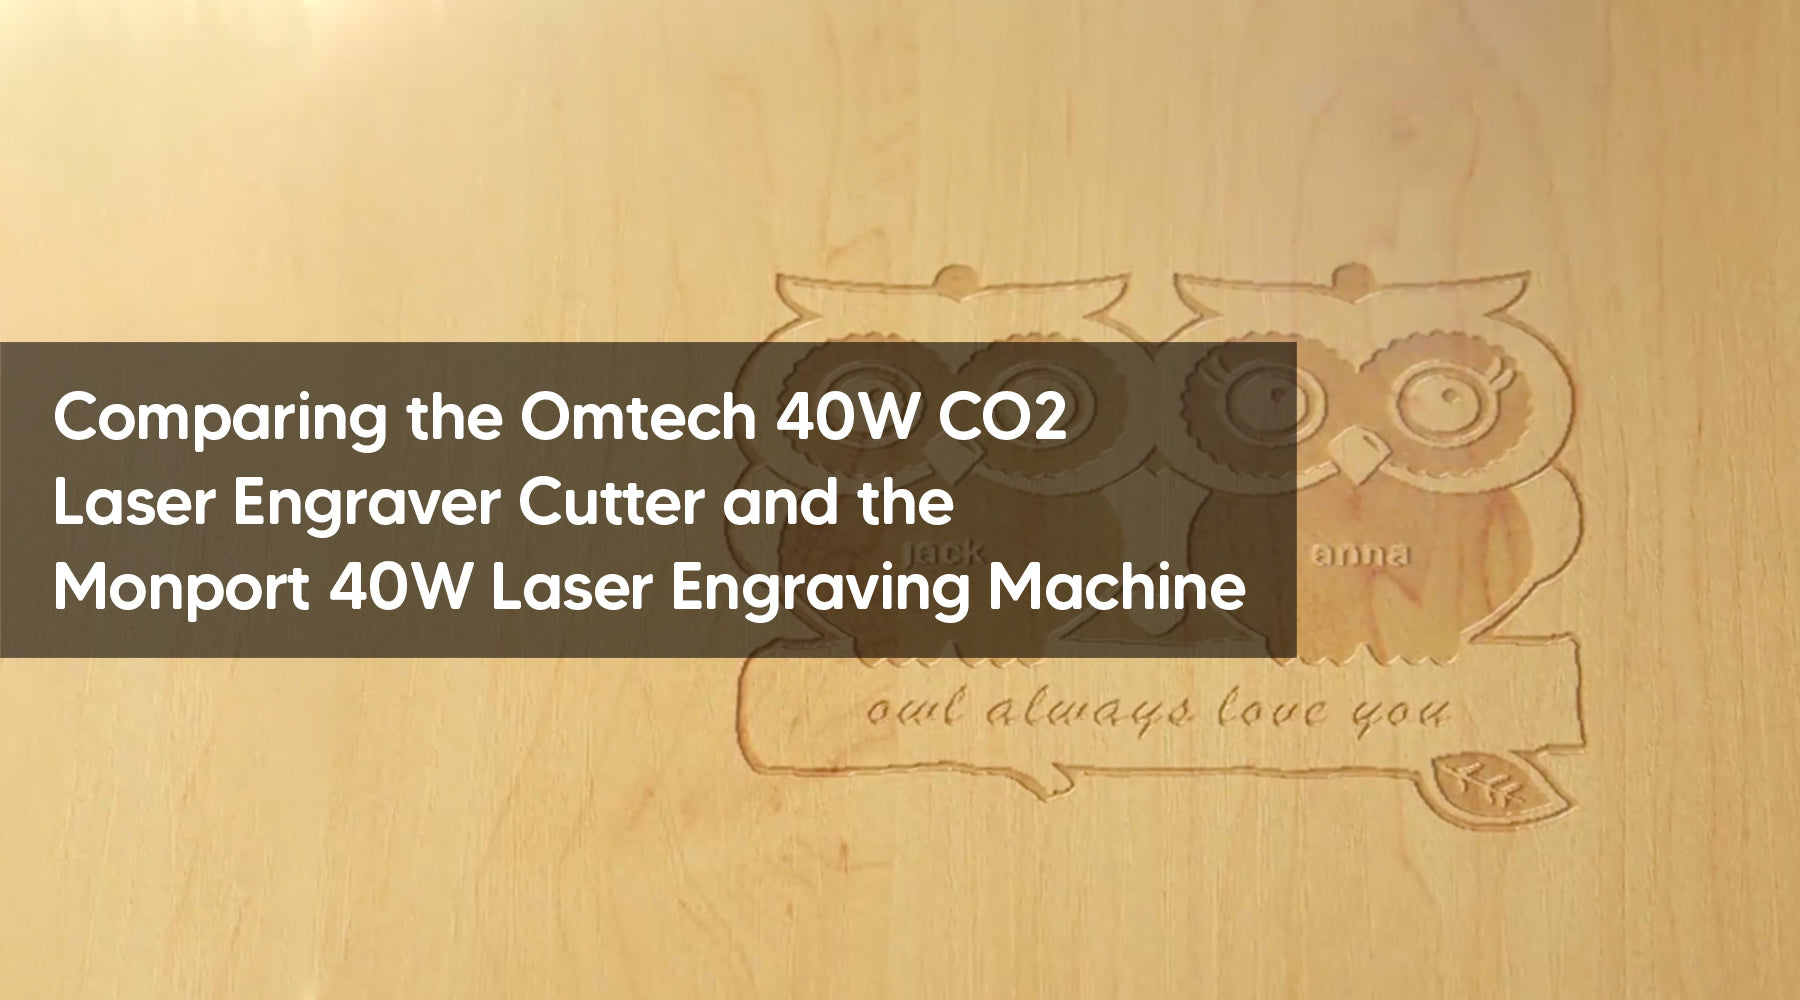 Comparing the Omtech 40W CO2 Laser Engraver Cutter and the Monport 40W Laser Engraving Machine